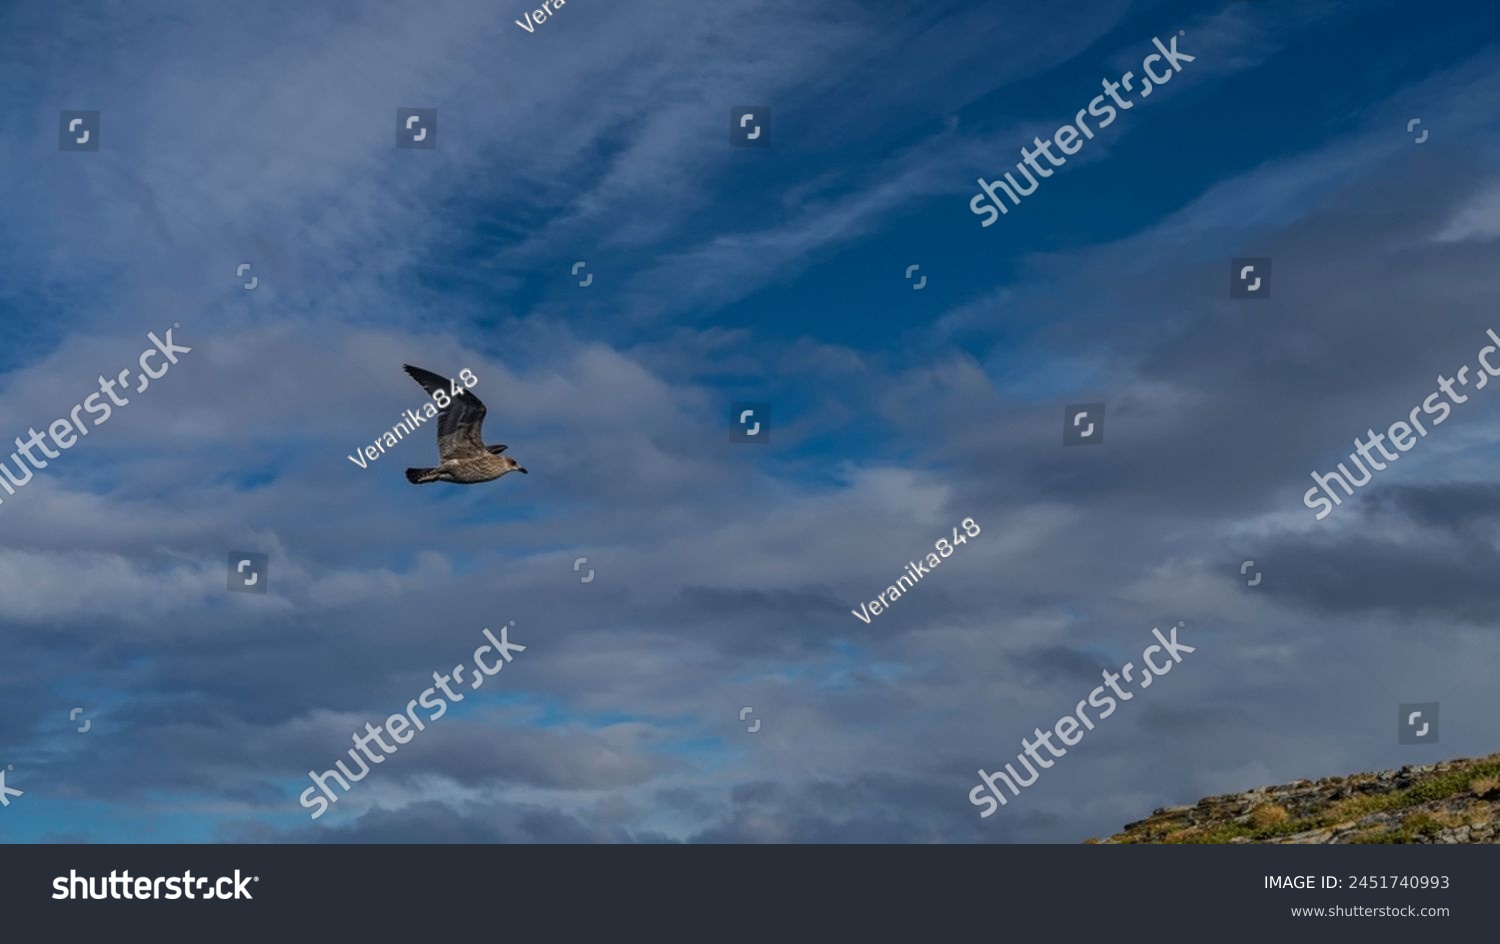 The petrel seabird flies in the air against a background of blue sky and clouds. The wings are raised. Mottled brown plumage. Argentina. Patagonia. #2451740993